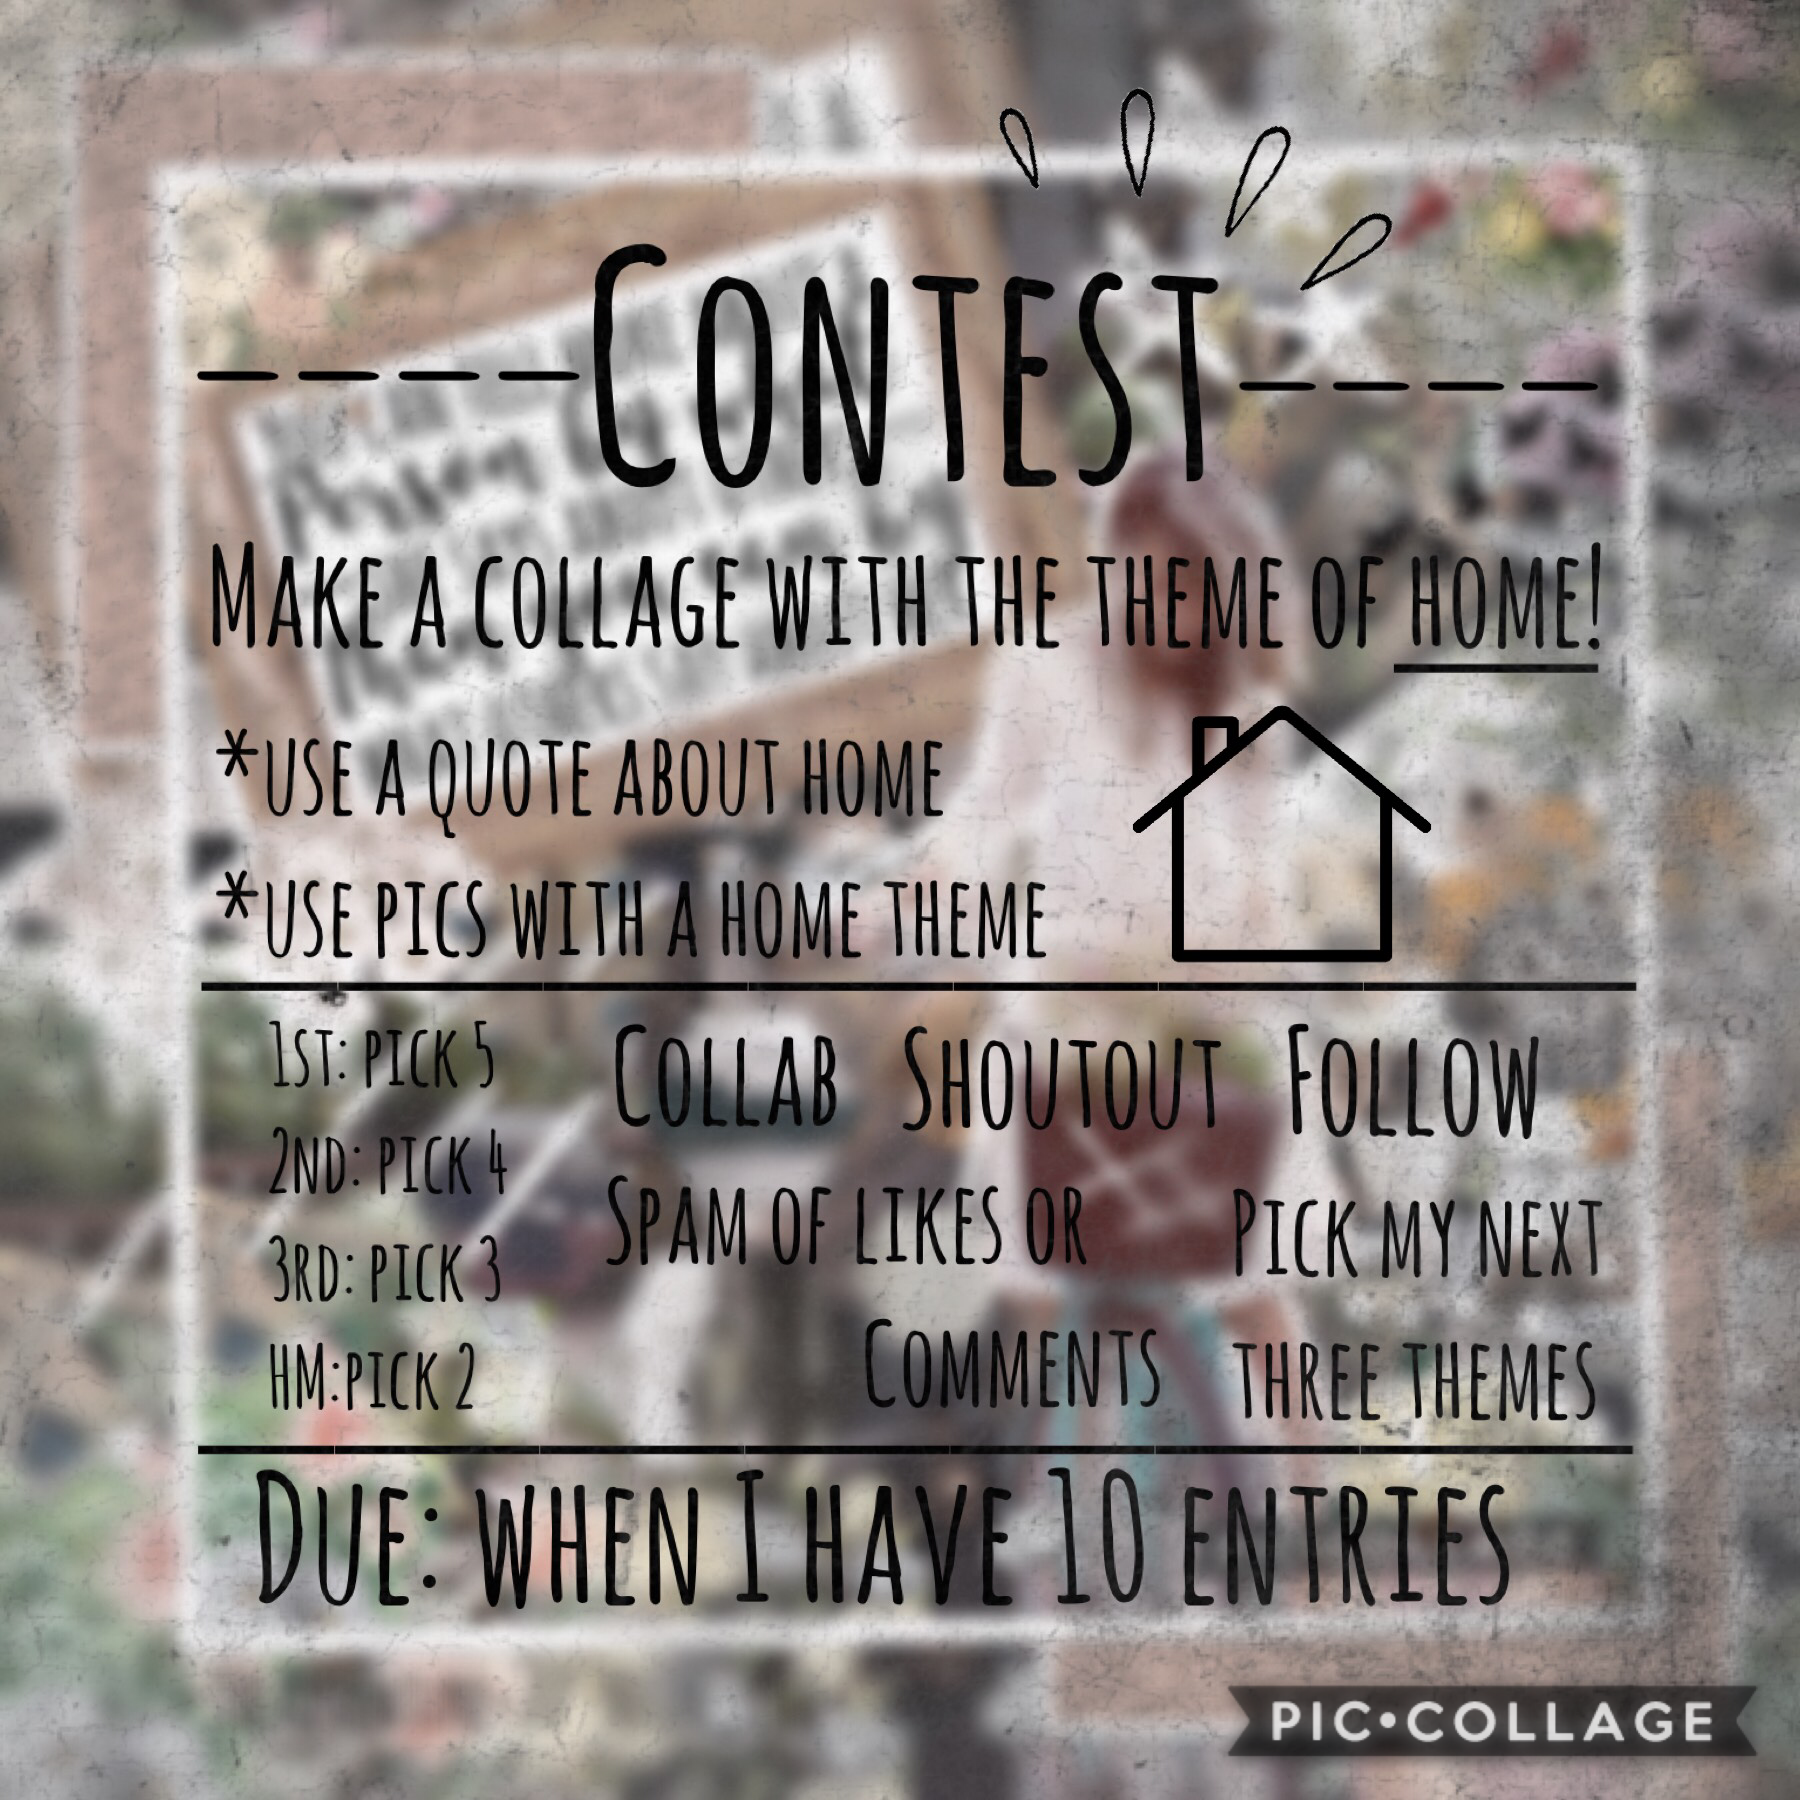 Details! Tap!
I haven’t done a contest in so long! I hope you guys have fun with this! Only 1 entry per person!